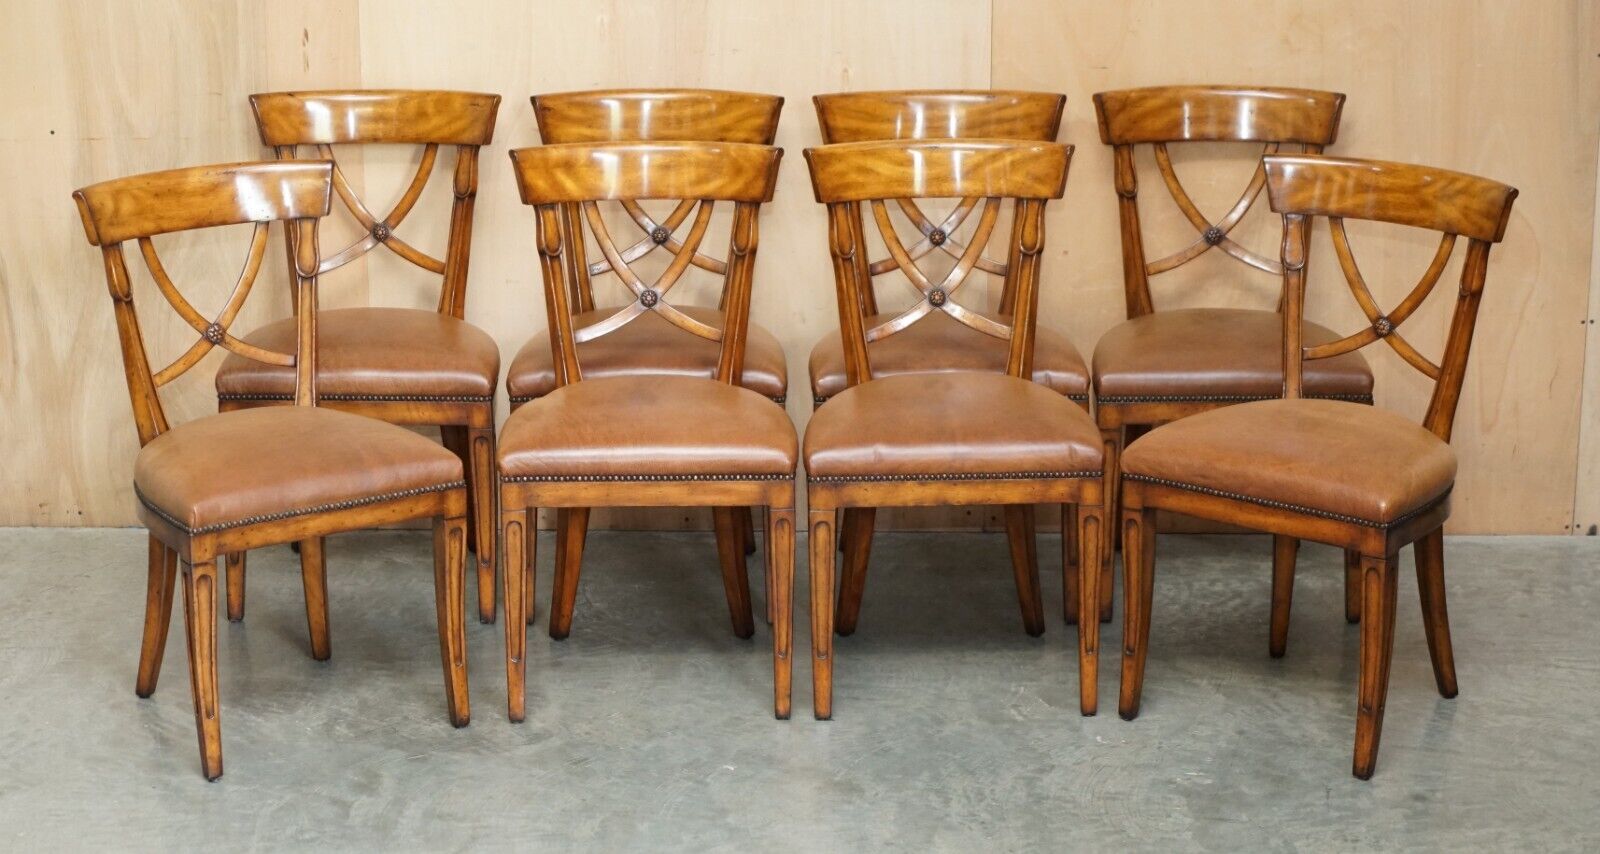 EIGHT STUNNING THEODORE ALEXANDER BROWN LEATHER EMBOSSED DINING CHAIRS PART SET